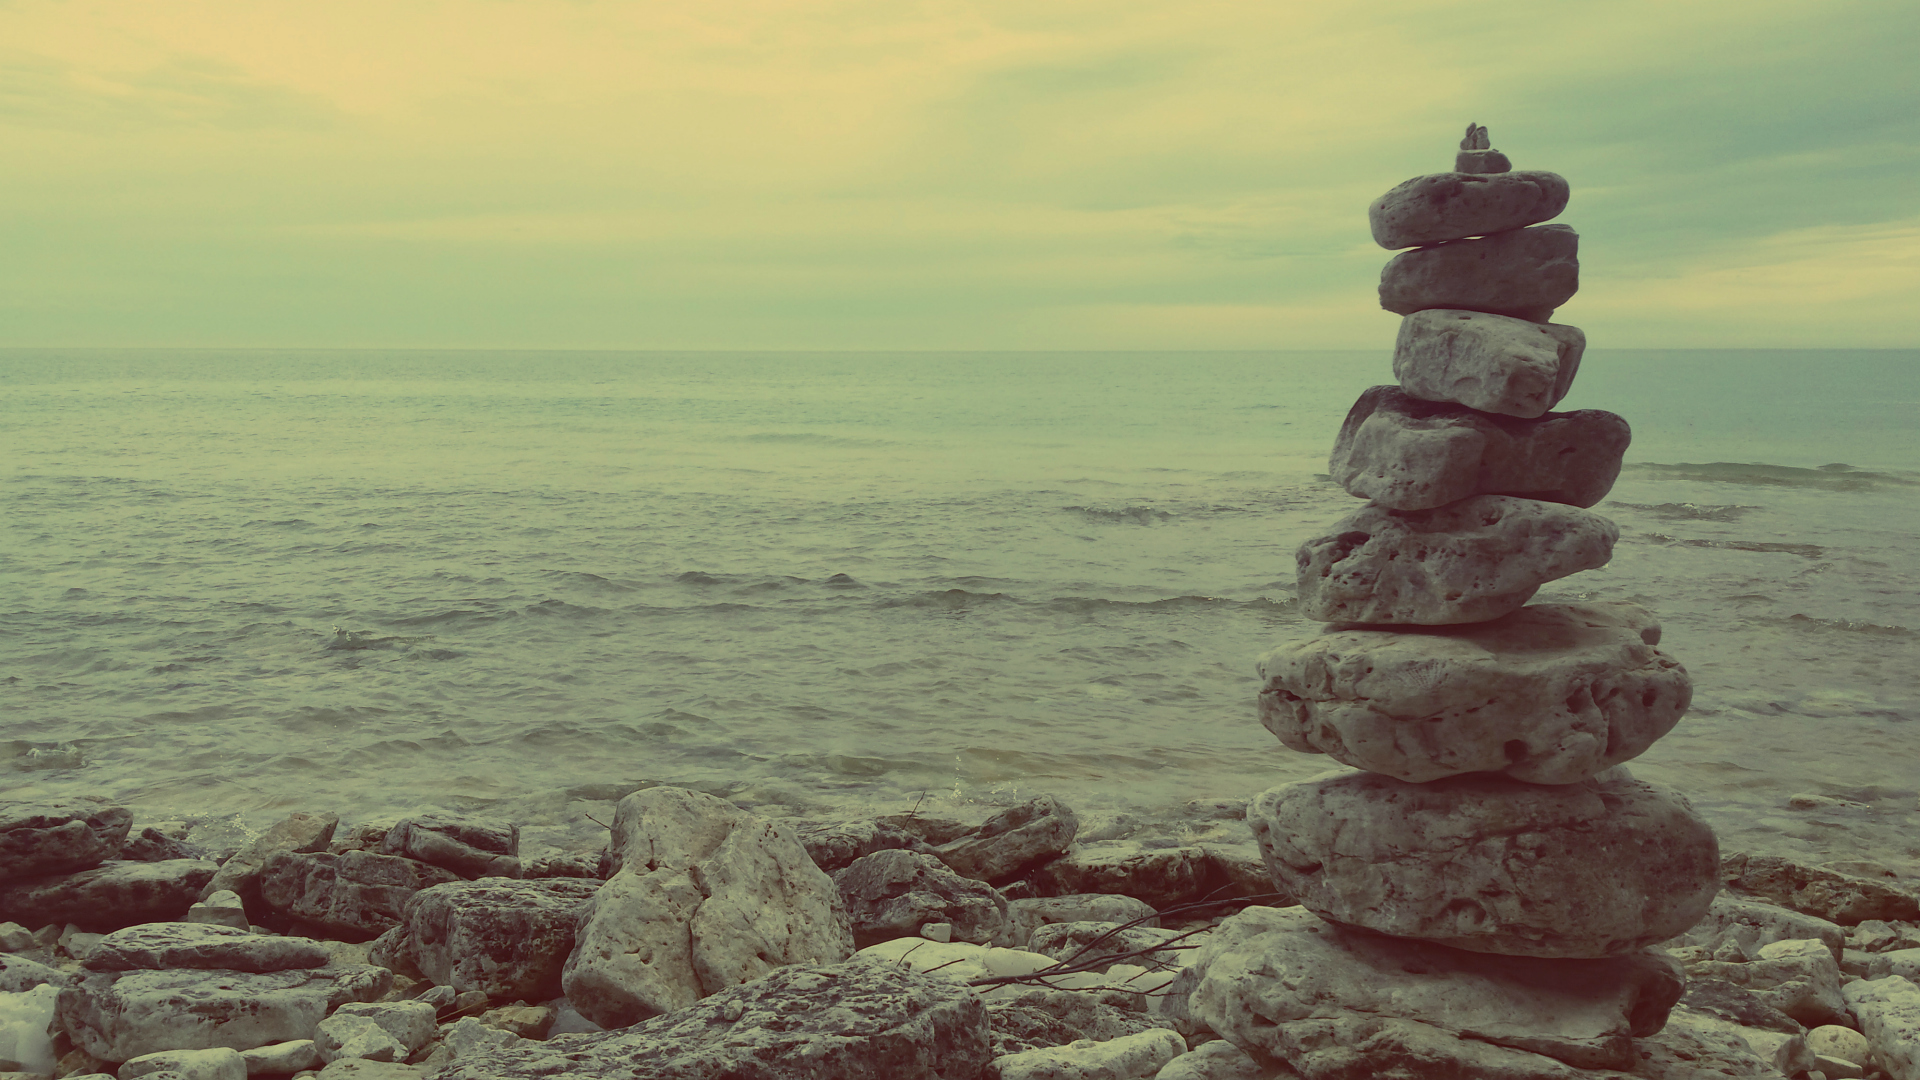 General 1920x1080 nature stones outdoors sea cairn